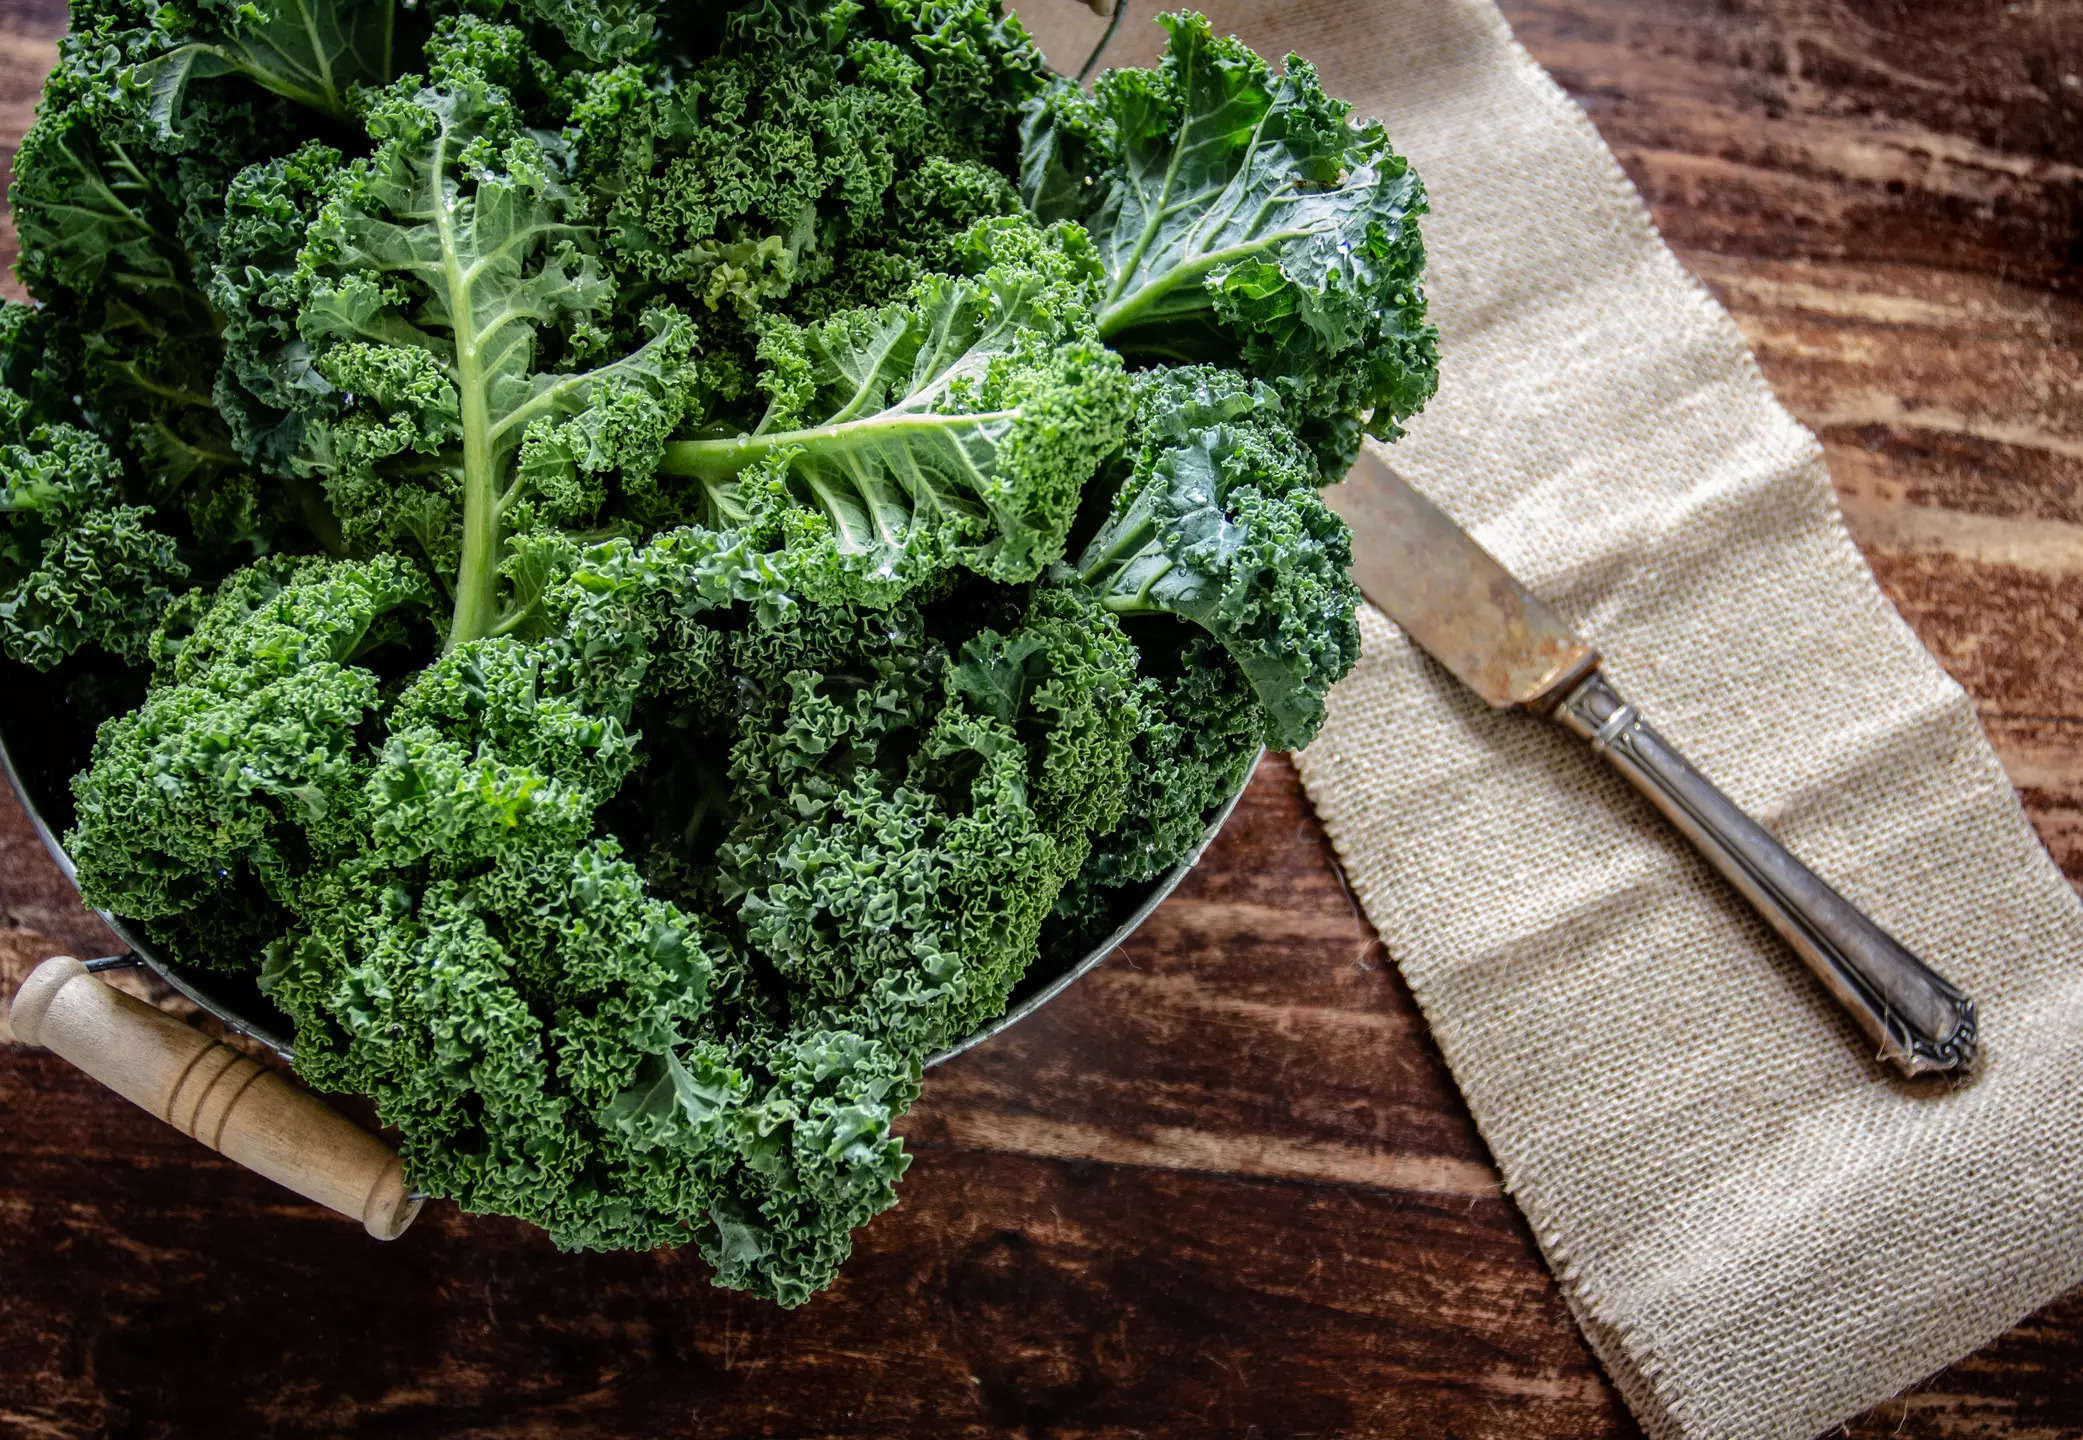 Besides being a rich source of calcium, kale also contains vitamin K1 which helps the body absorb and regulate calcium levels as too much could harm the kidneys.